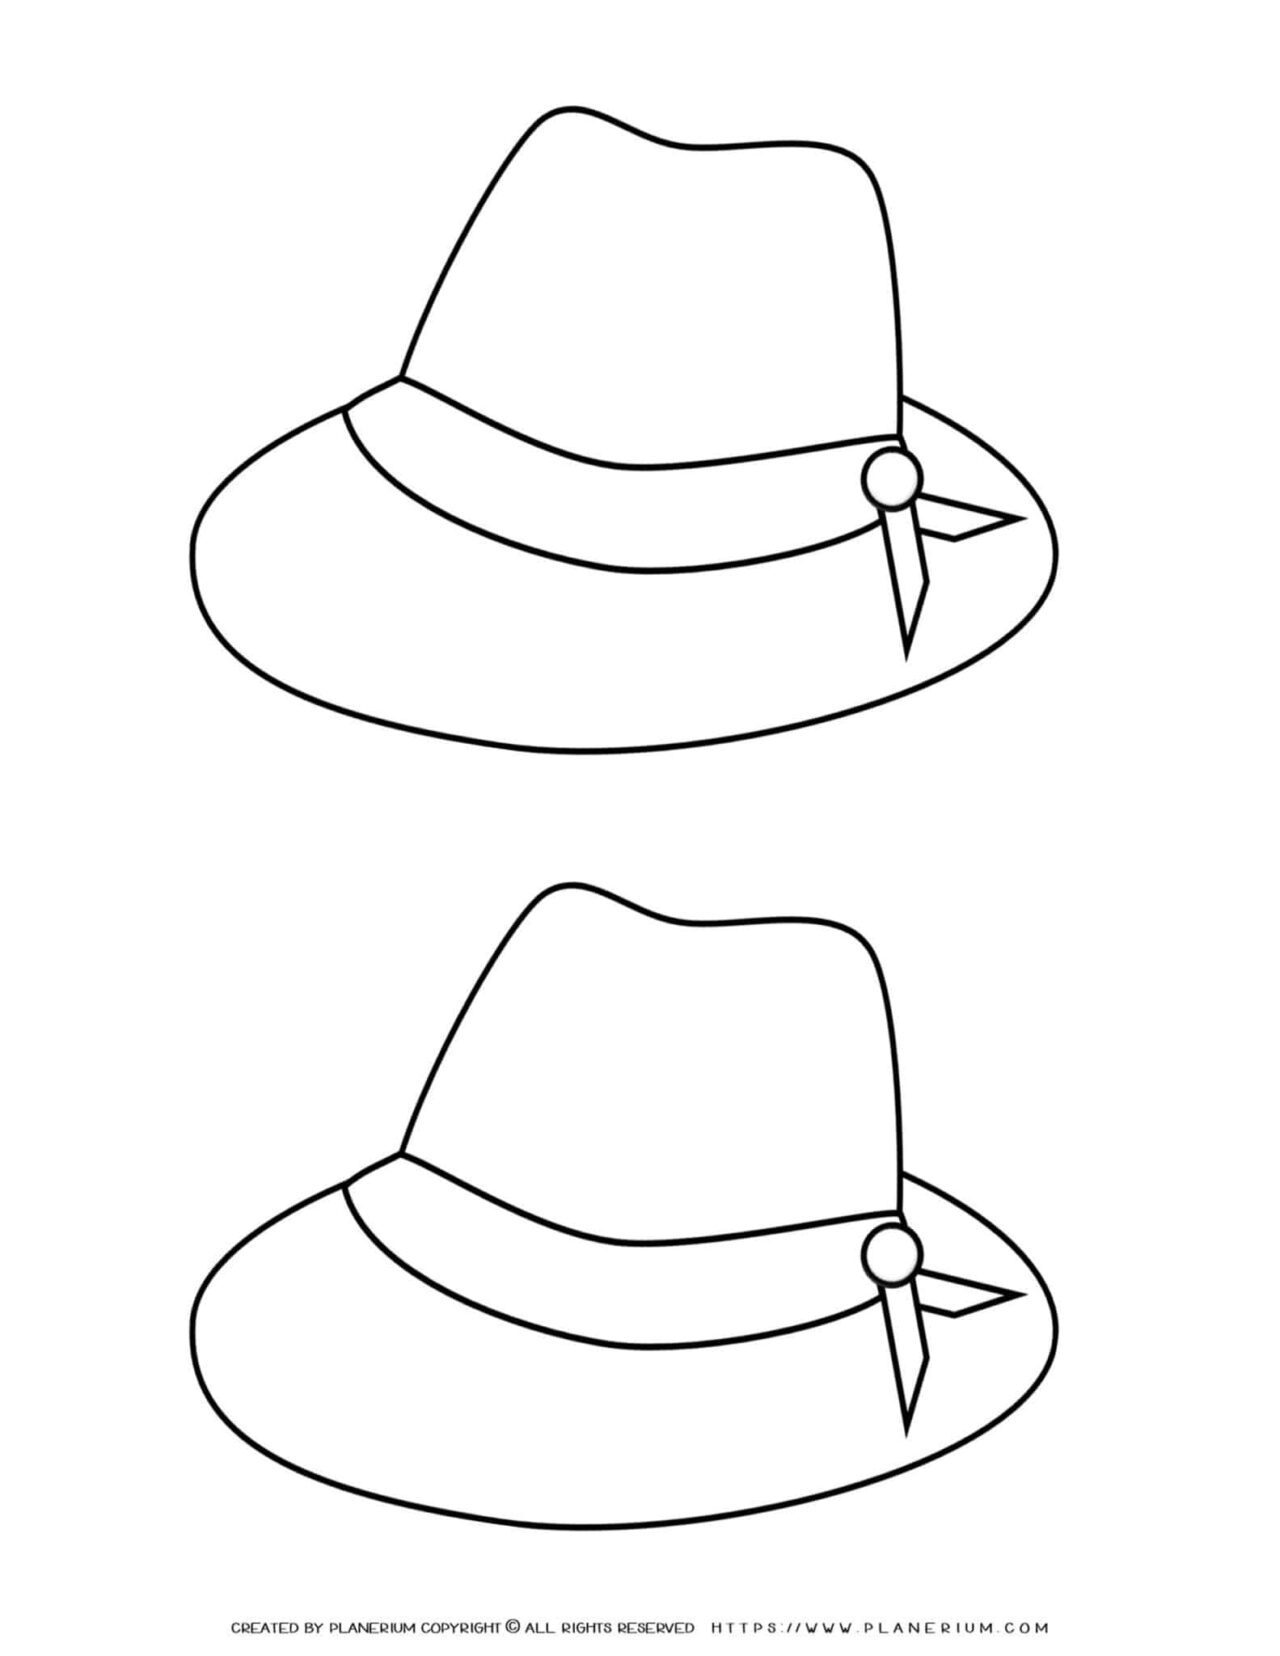 Clothes Template - Two Hats | Planerium